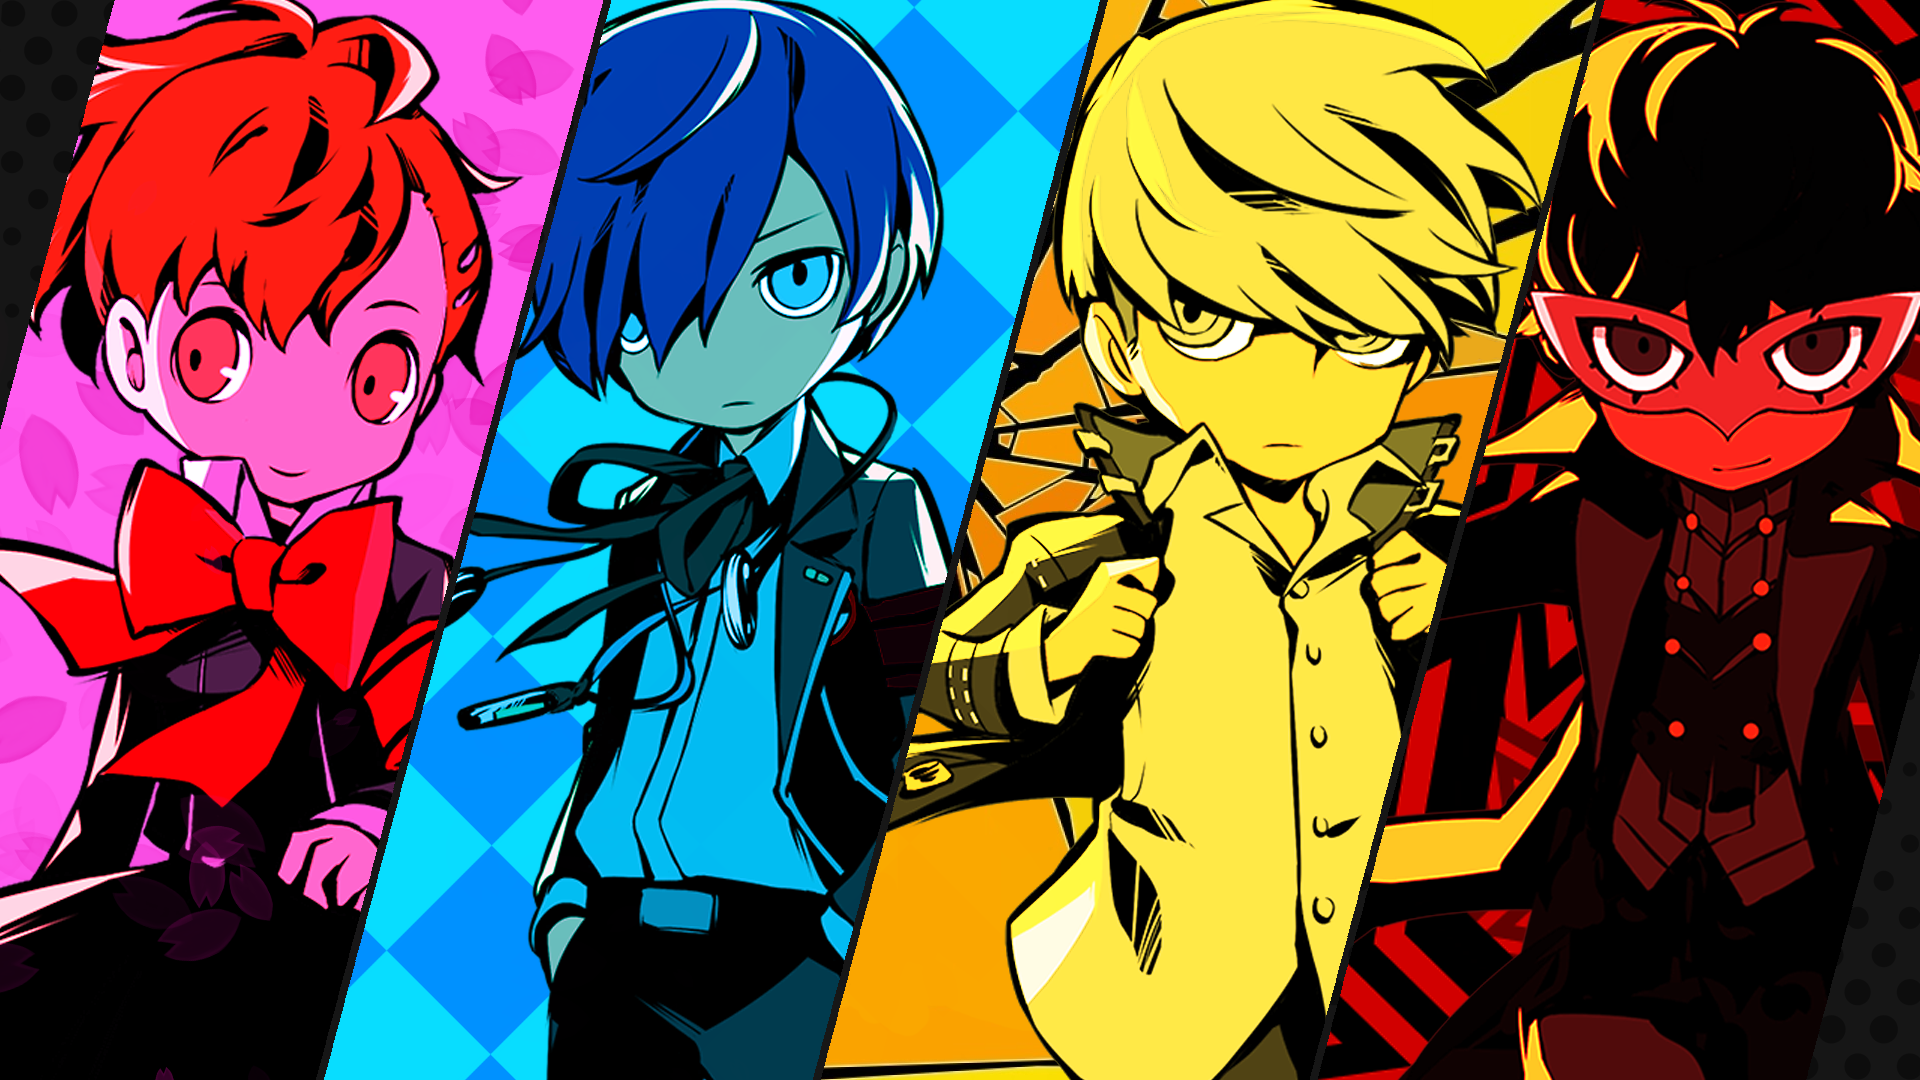 Made a wallpaper using the MCs from Persona Q what do you guys